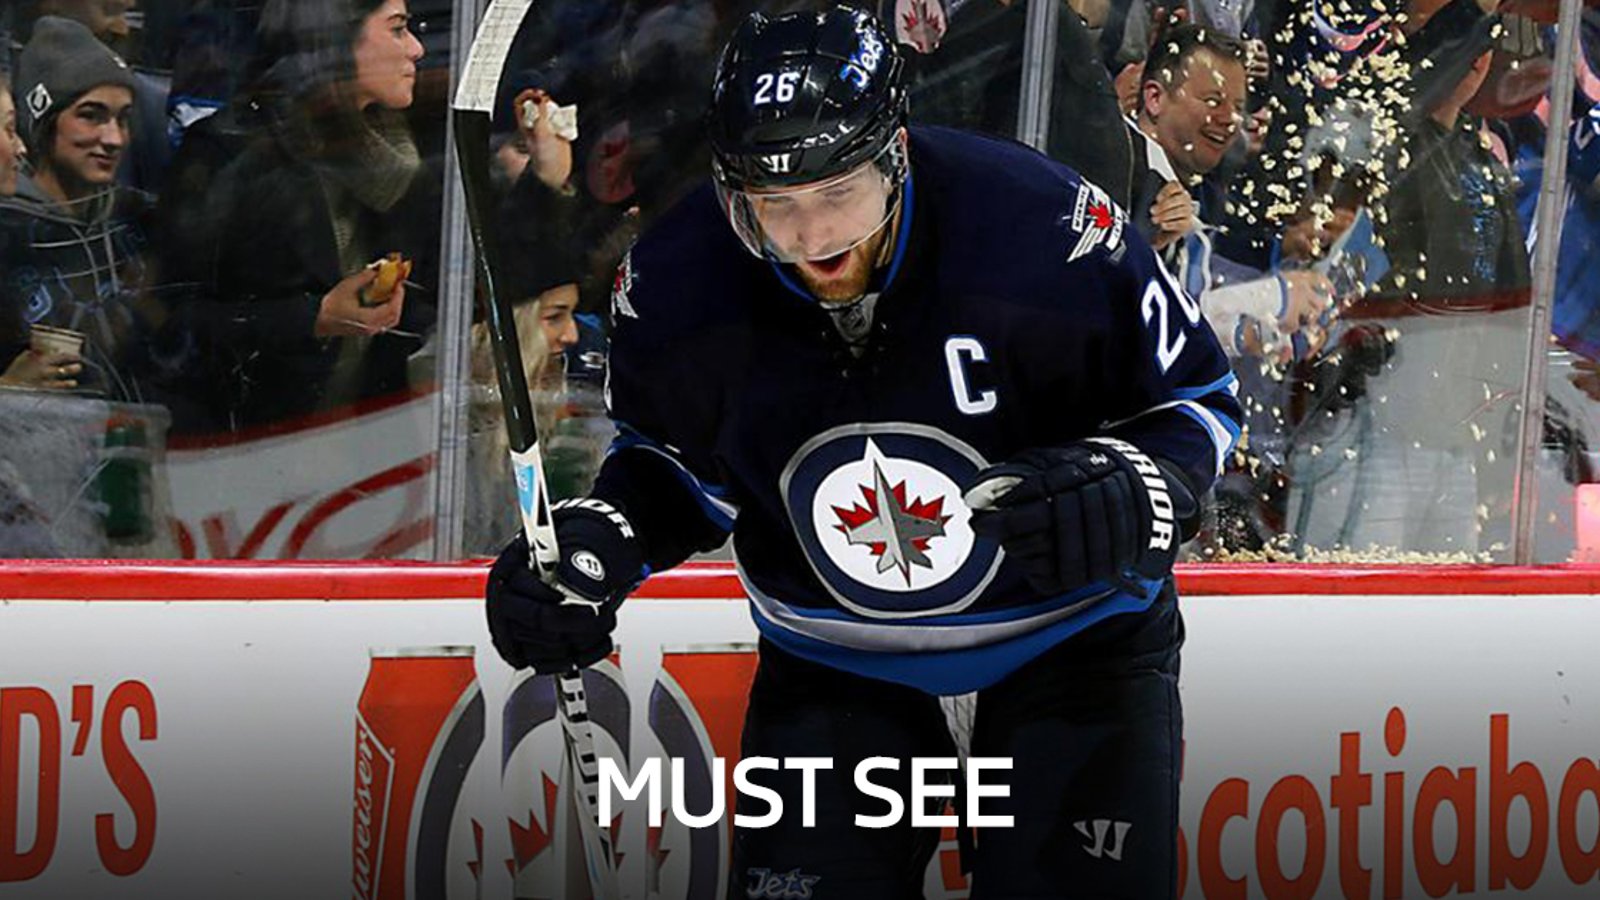 Must see: Blake Wheeler scores a beautiful goal to give his team the win! 